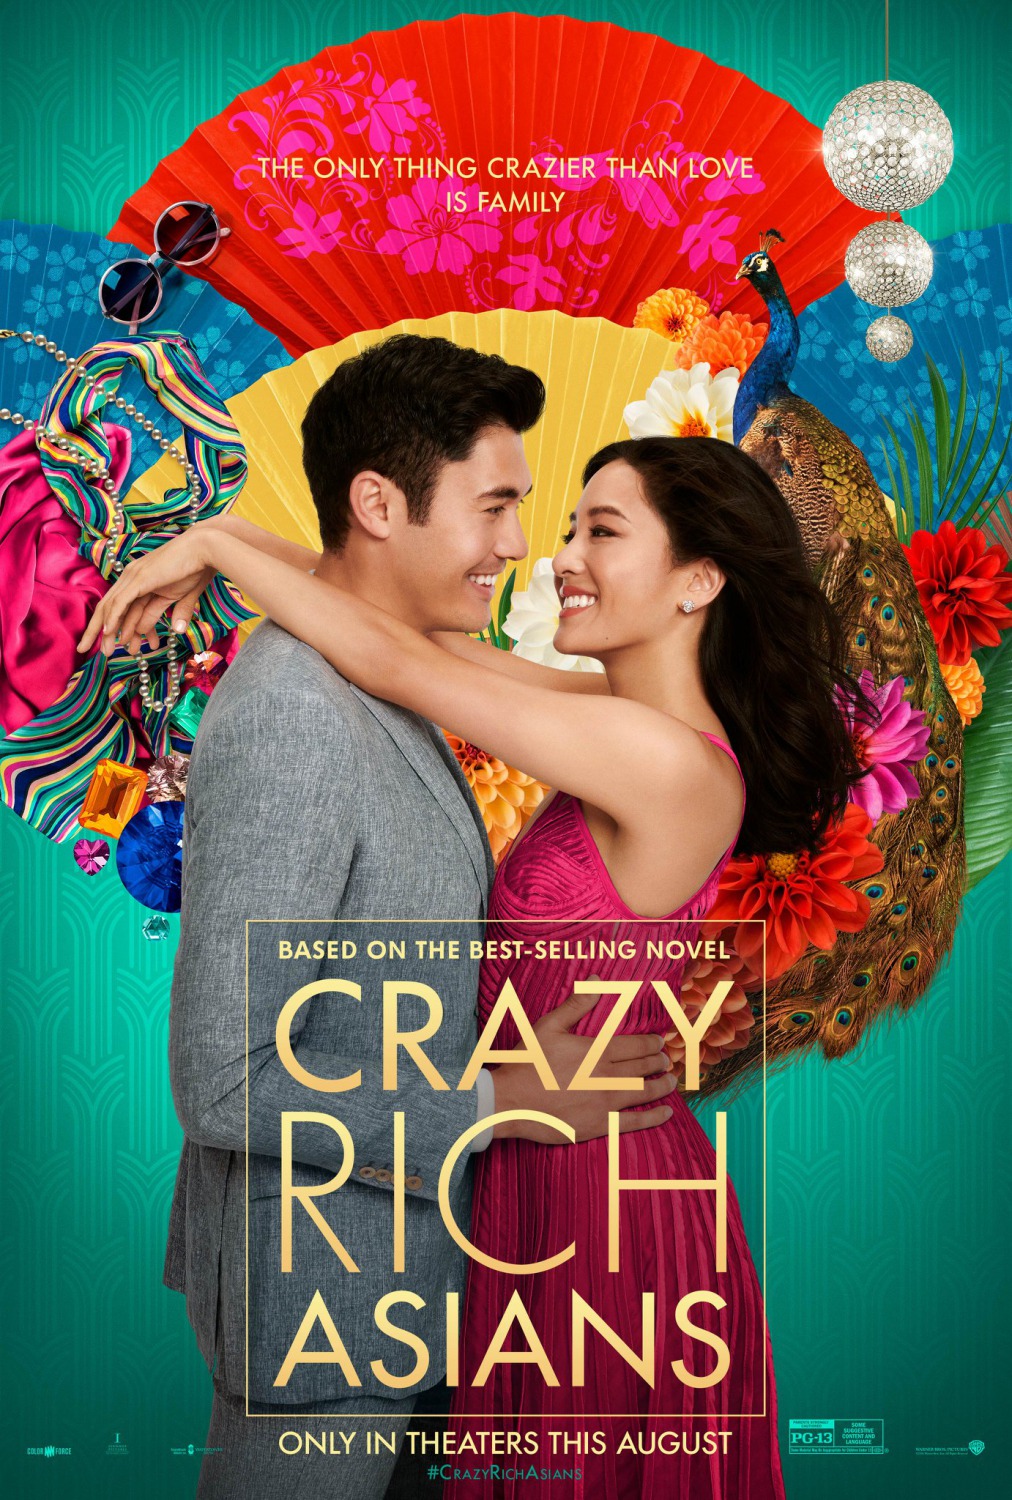 Poster for "Crazy Rich Asians" 2018 film